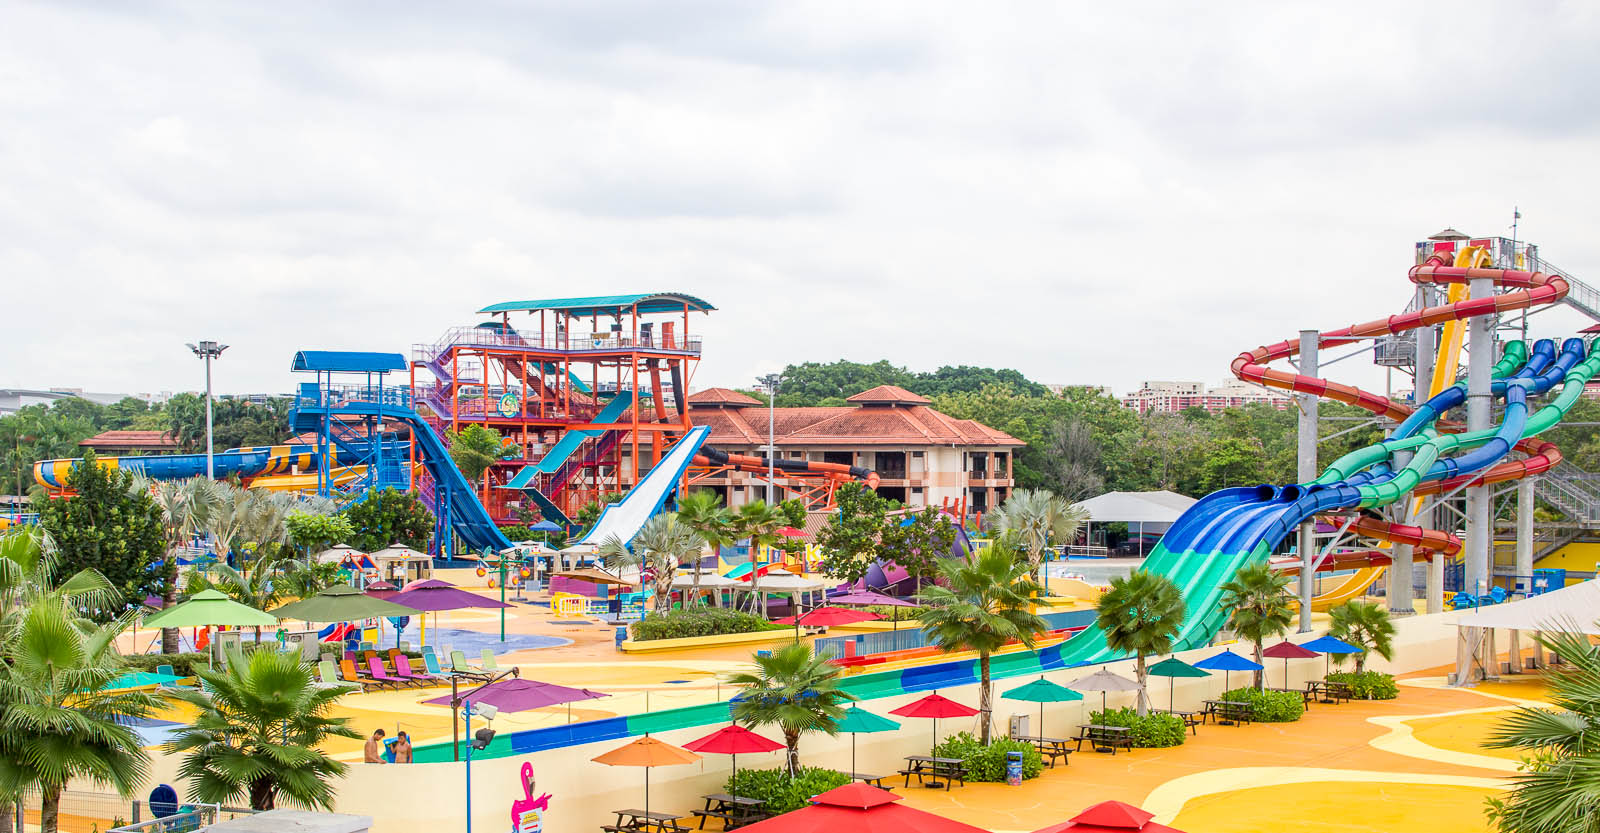 5 Theme Parks to Check Out in Singapore